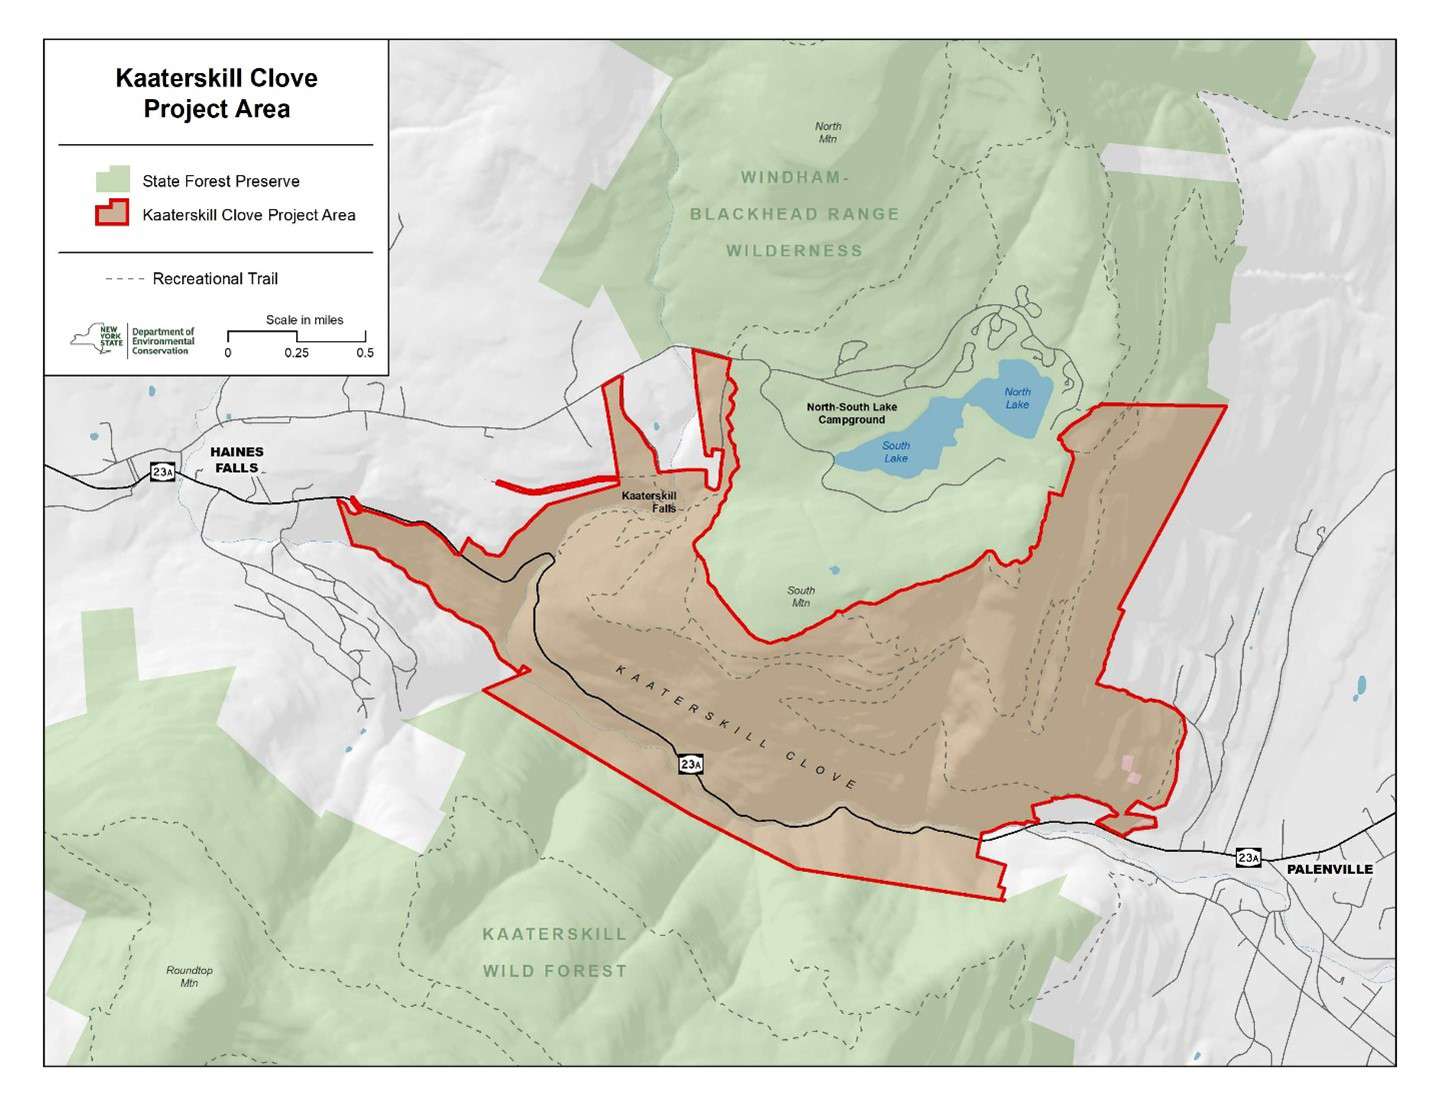 A map shows the visitor use management project area for the Kaaterskill Clove area of the Catskill Park.